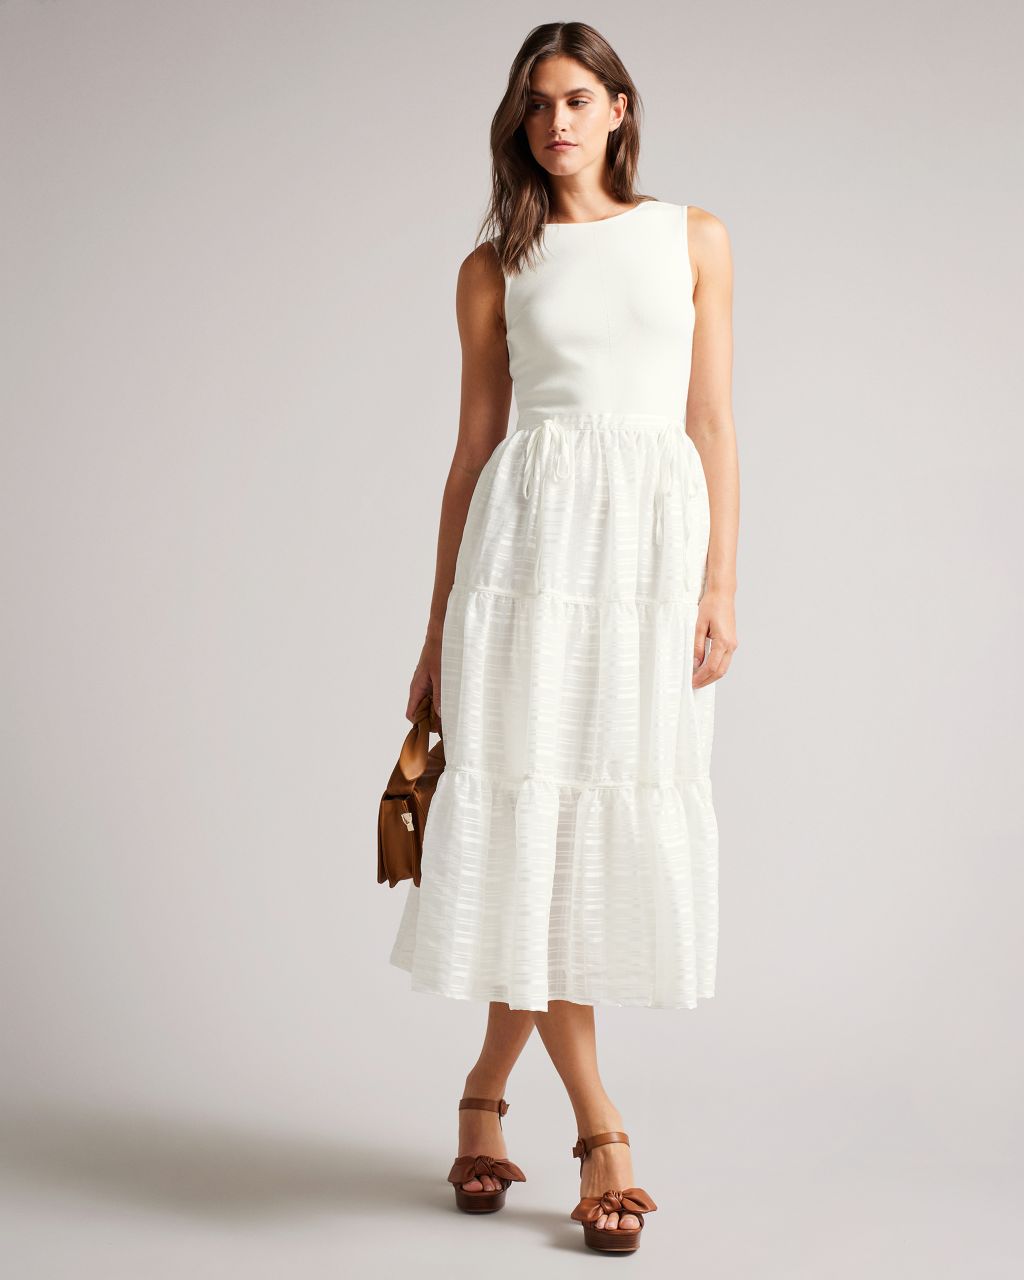 Ted Baker Women's Knit Bodice Midi Dress With Tiered Skirt In White, Skylir